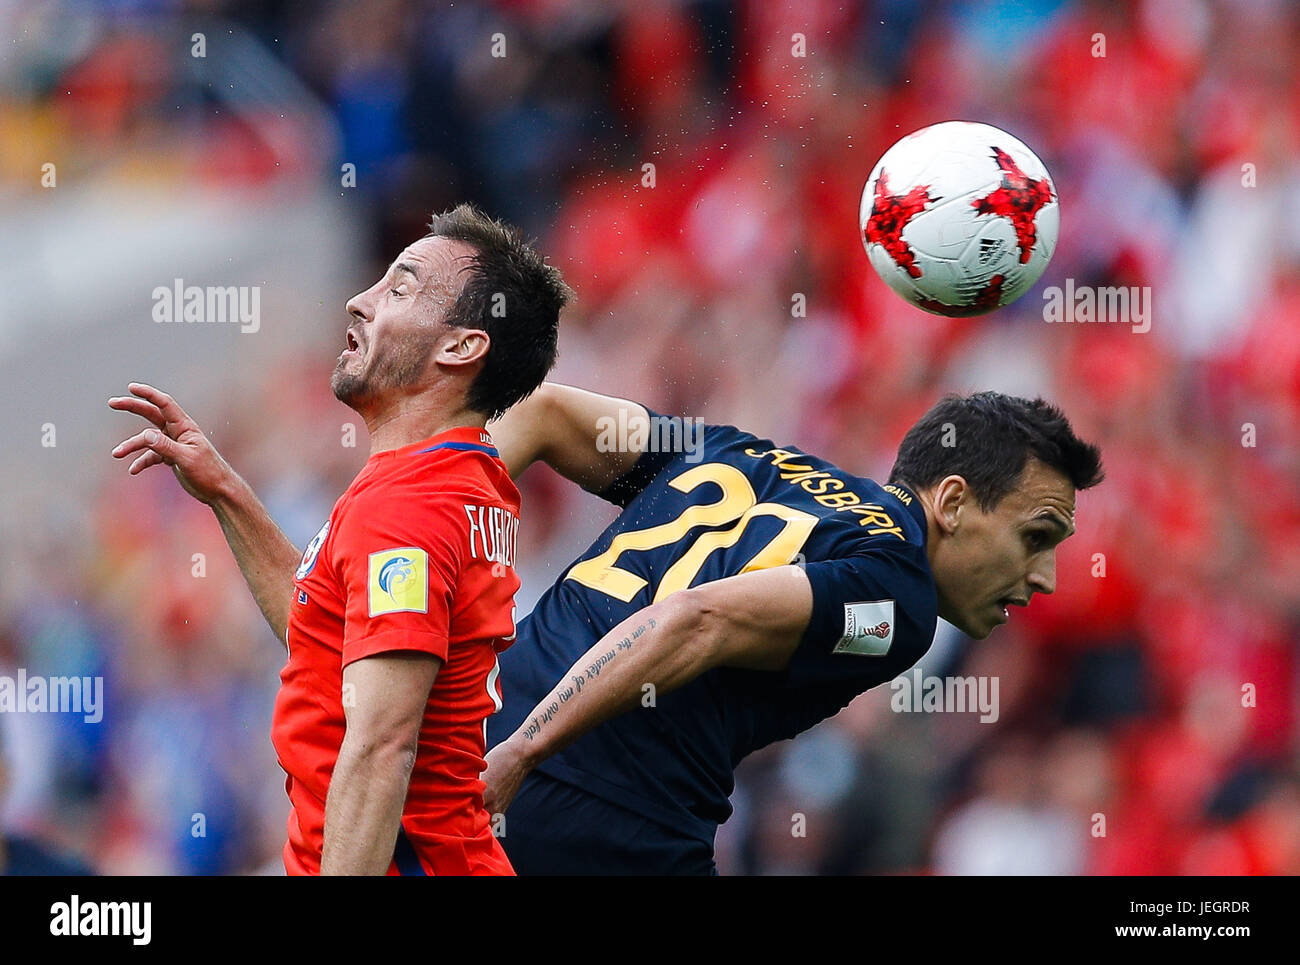 Moscow, Russia. 25th Jun, 2017. FUENZALIDA Jose of Chile plays the ball with SAINSBURY Trent of Australia during a match between Chile and Australia valid for the third round of the Confederations Cup 2017 on Sunday (25th), held at the Spartak Stadium (Otkrytie Arena) in Moscow, Russia. Credit: Foto Arena LTDA/Alamy Live News Credit: Foto Arena LTDA/Alamy Live News Credit: Foto Arena LTDA/Alamy Live News Credit: Foto Arena LTDA/Alamy Live News Stock Photo